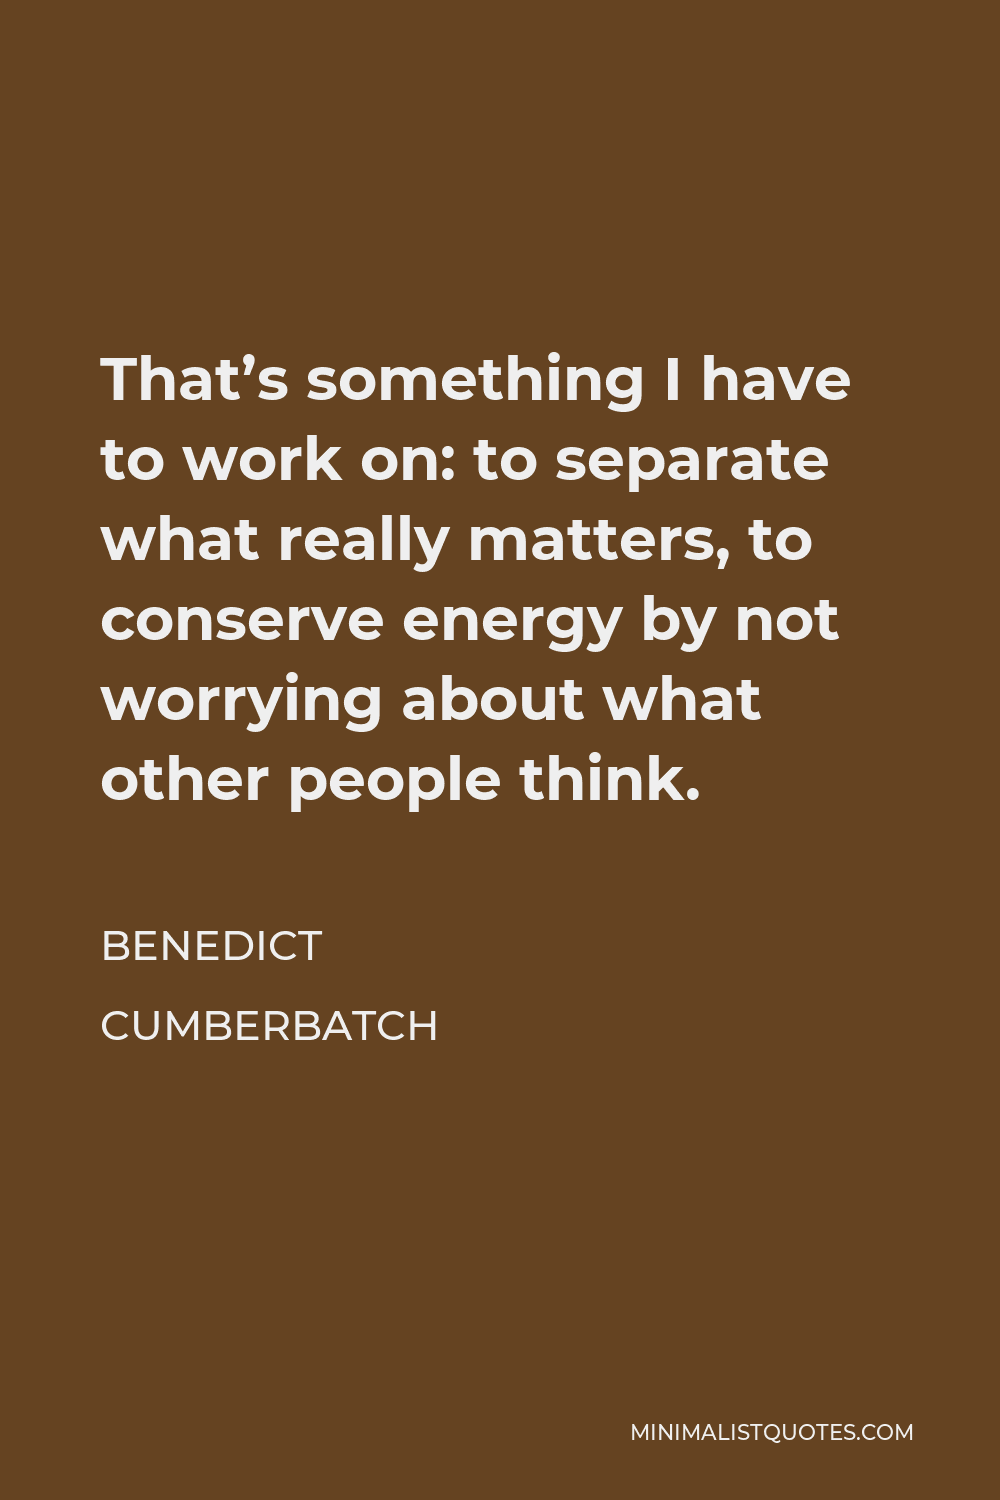 Benedict Cumberbatch Quote - That’s something I have to work on: to separate what really matters, to conserve energy by not worrying about what other people think.